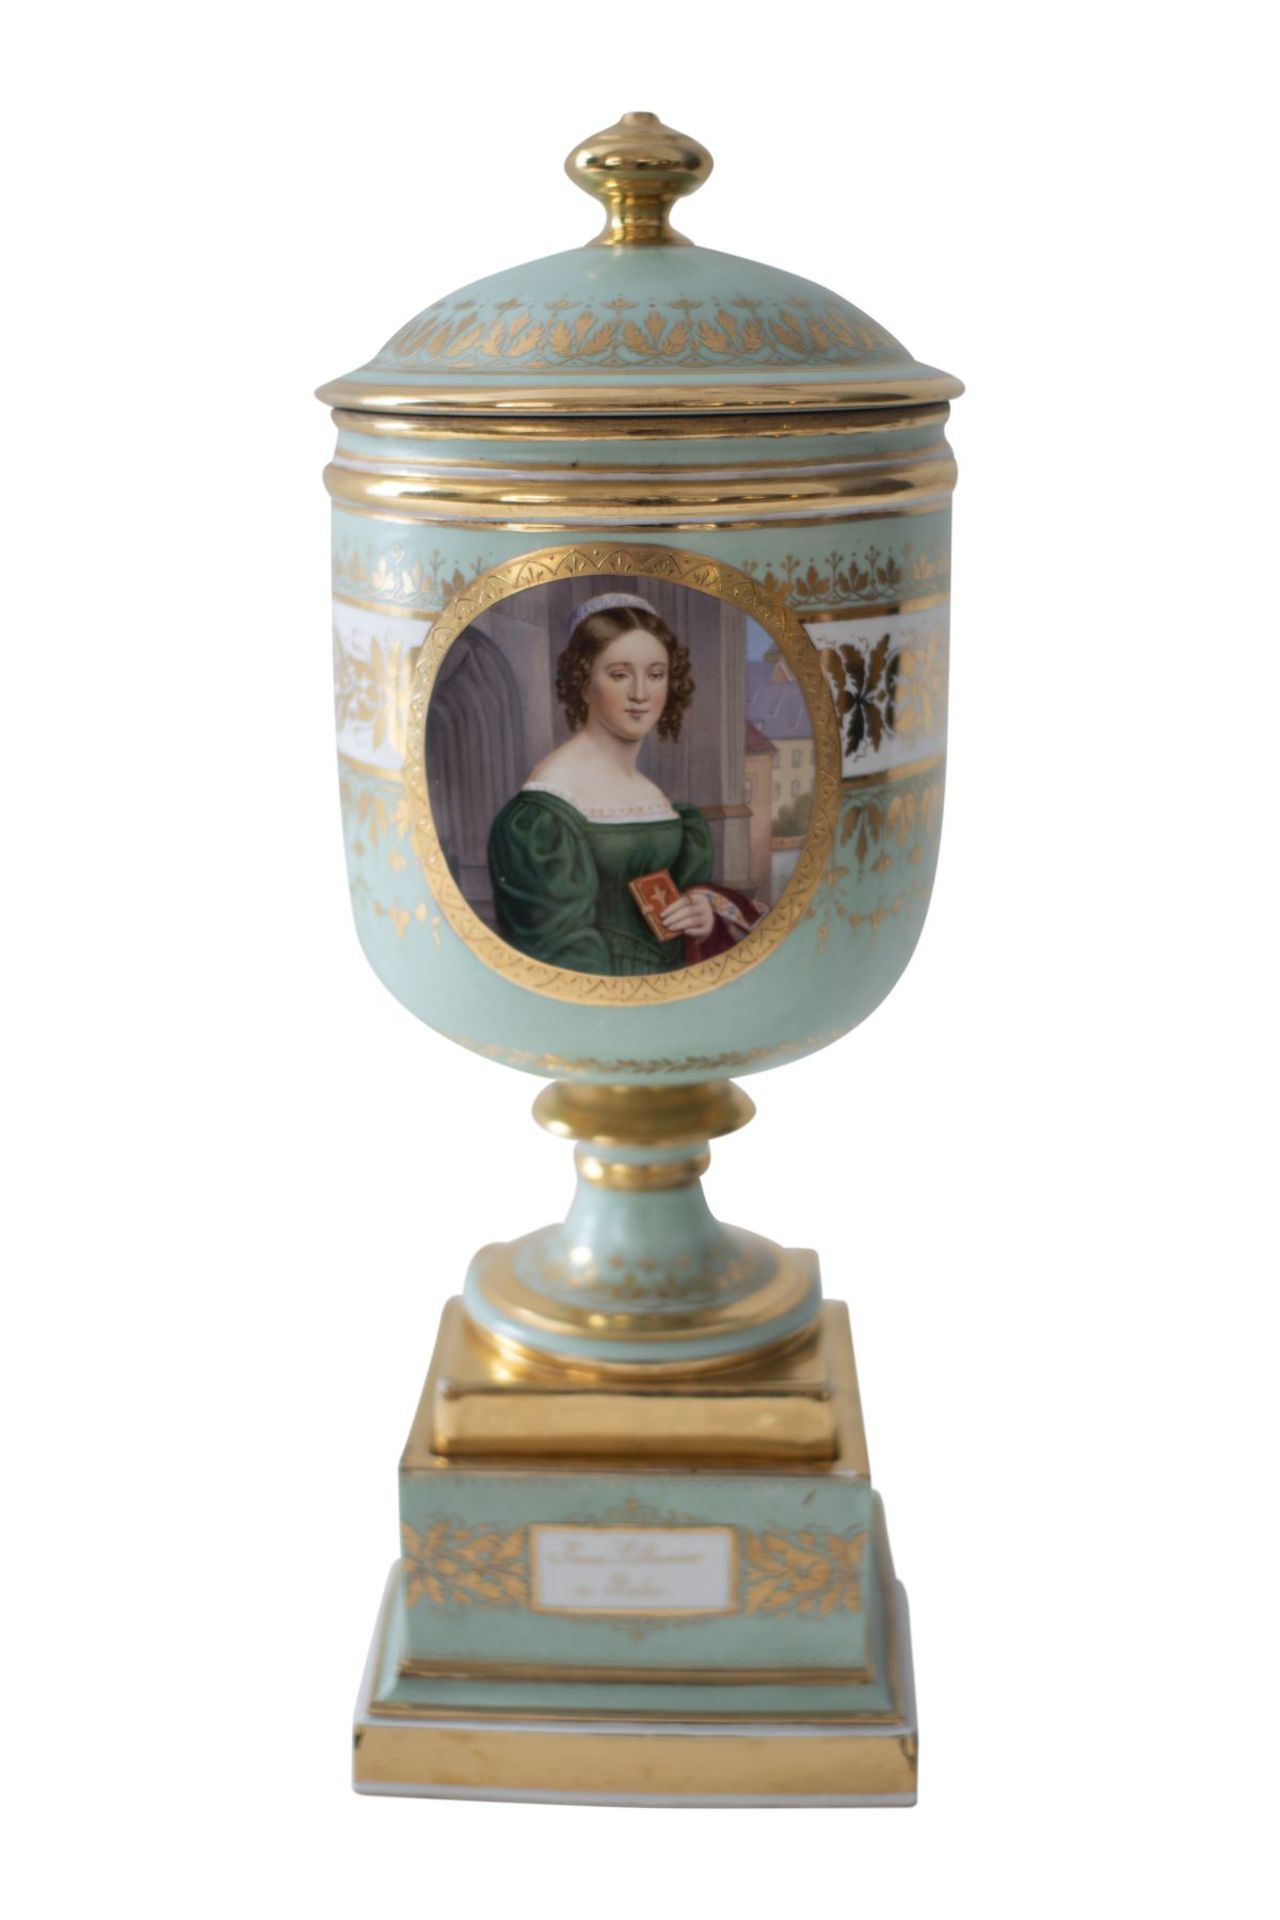 Attributed to Joseph Karl Stieler (1781-1858) "Biedermeier Trophy with Base and Cover"